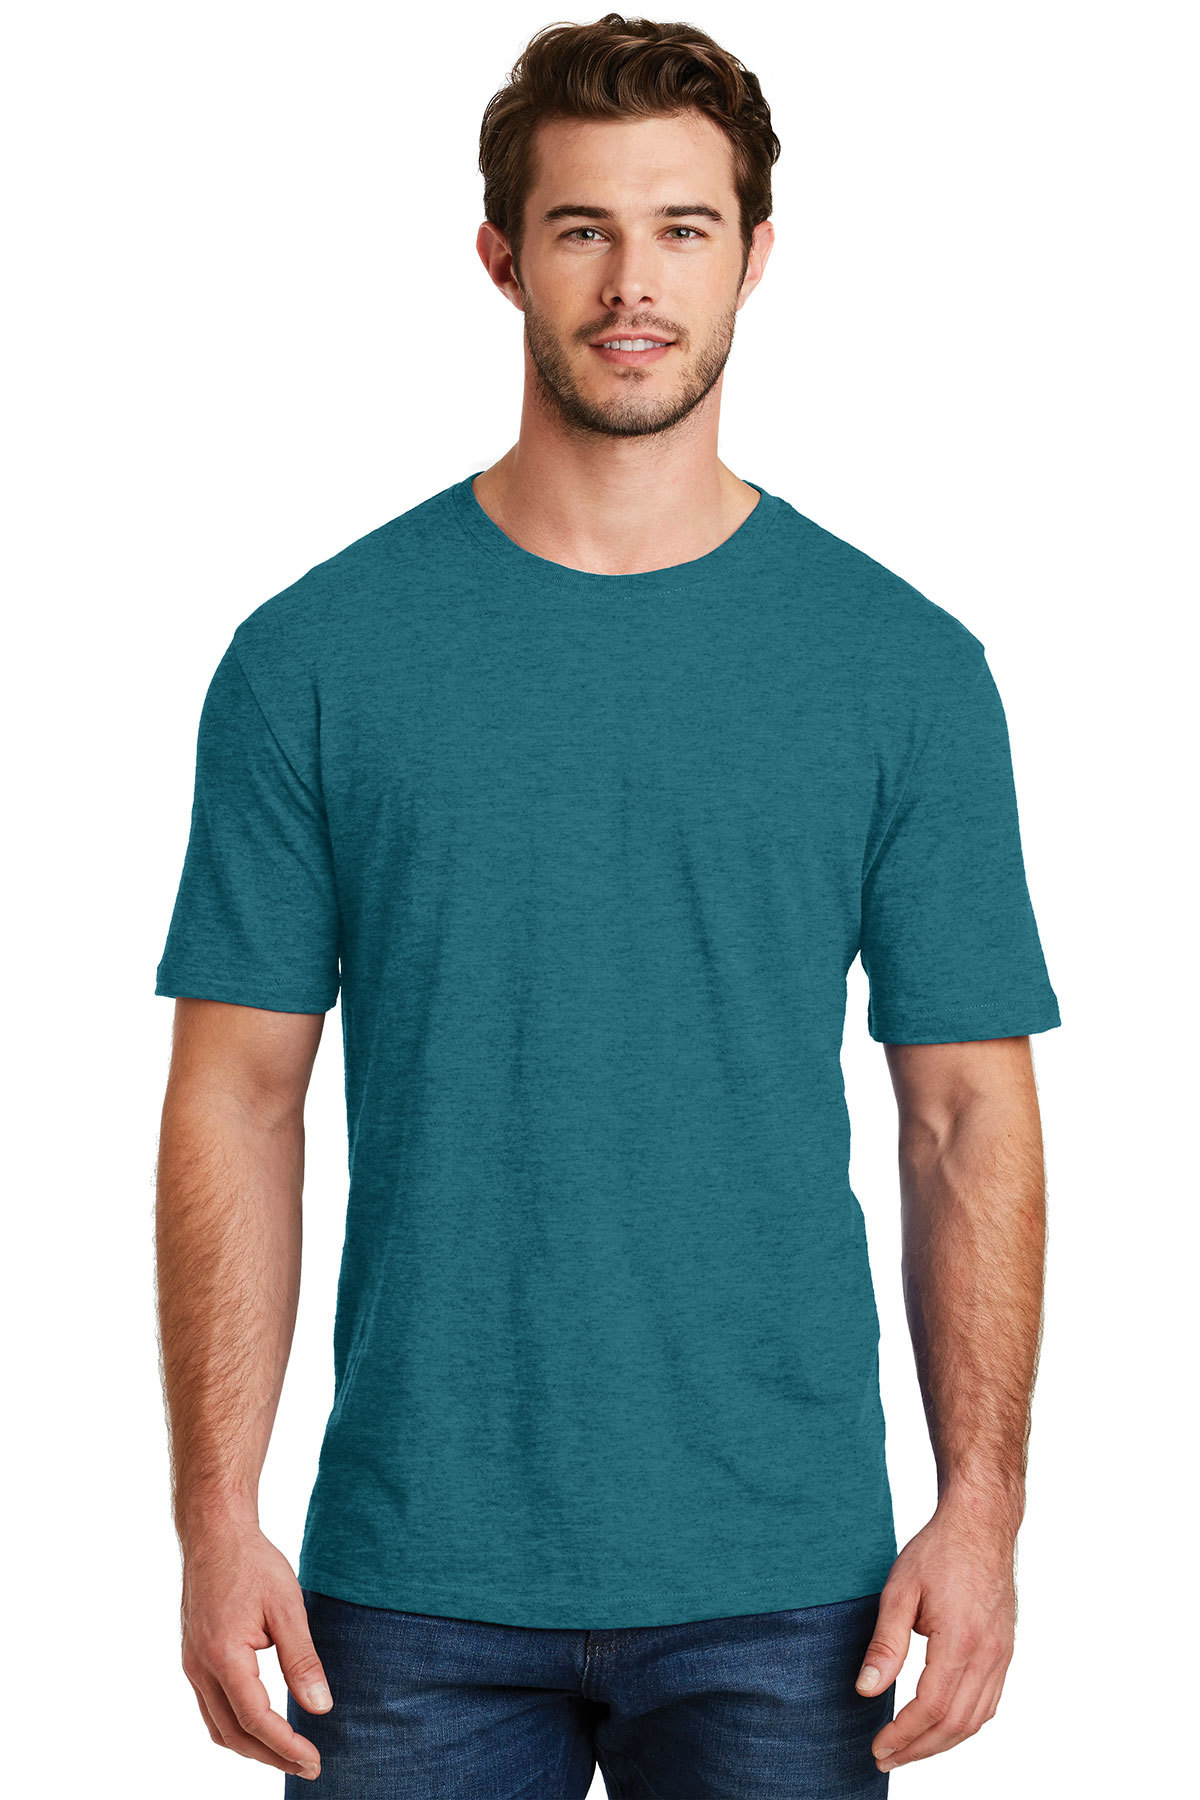 click to view Heathered Teal